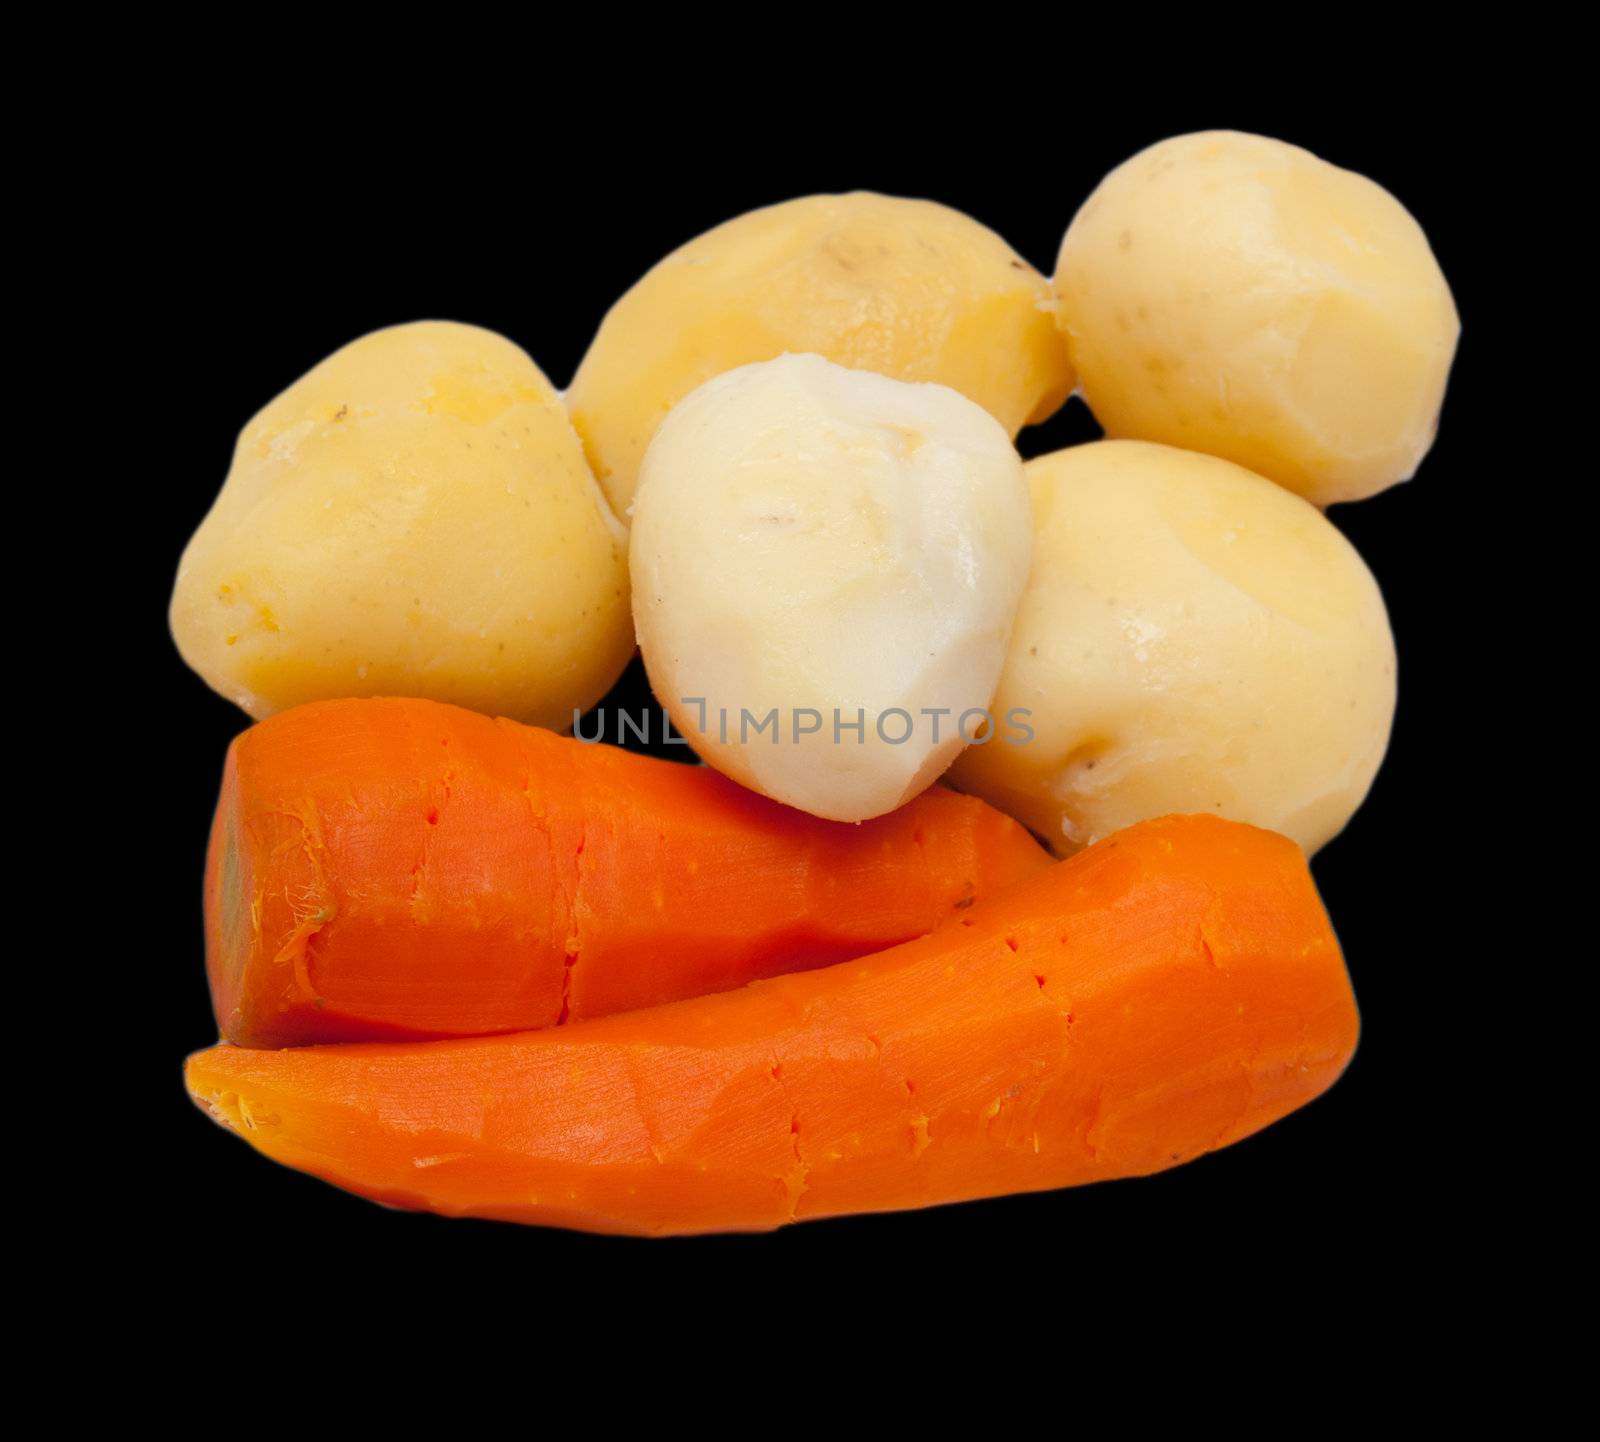 boiled potatoes and carrots on a black background by schankz